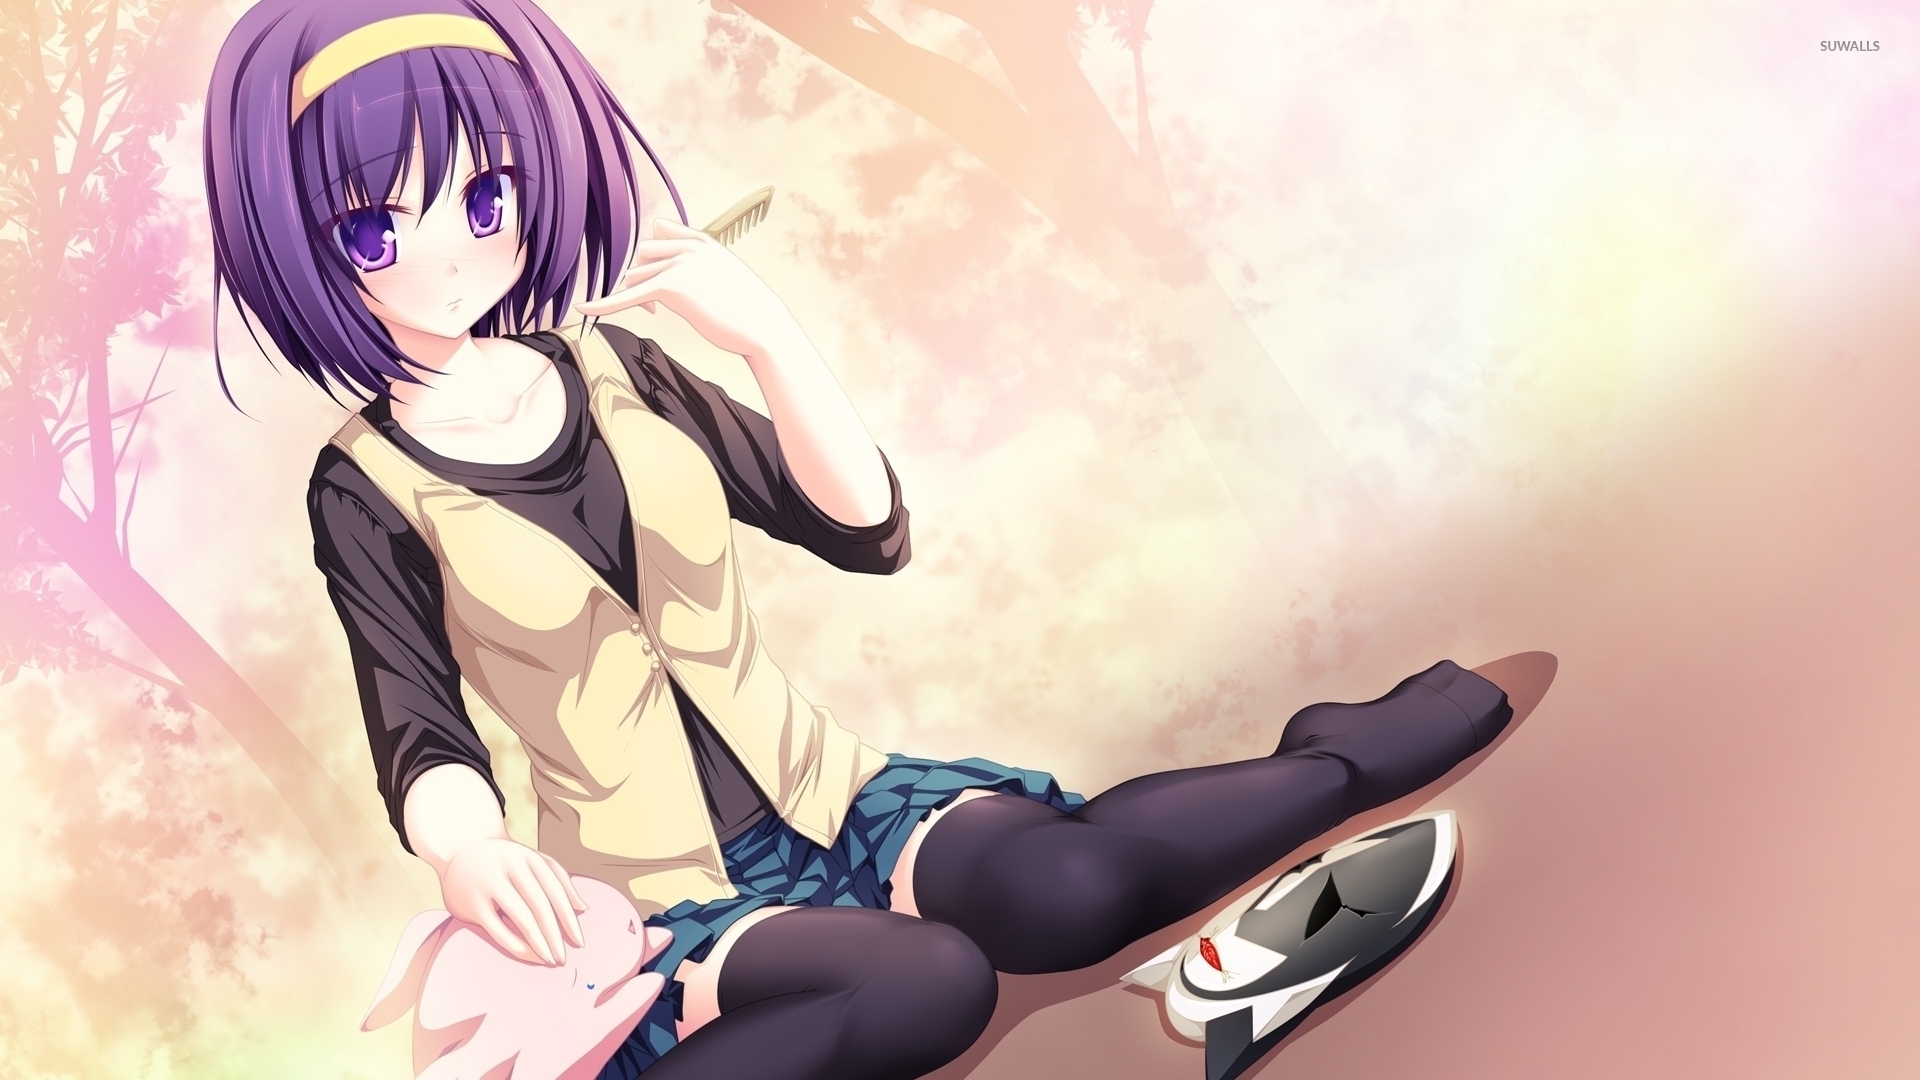 Girl with short purple hair on the ground wallpaper - Anime wallpapers